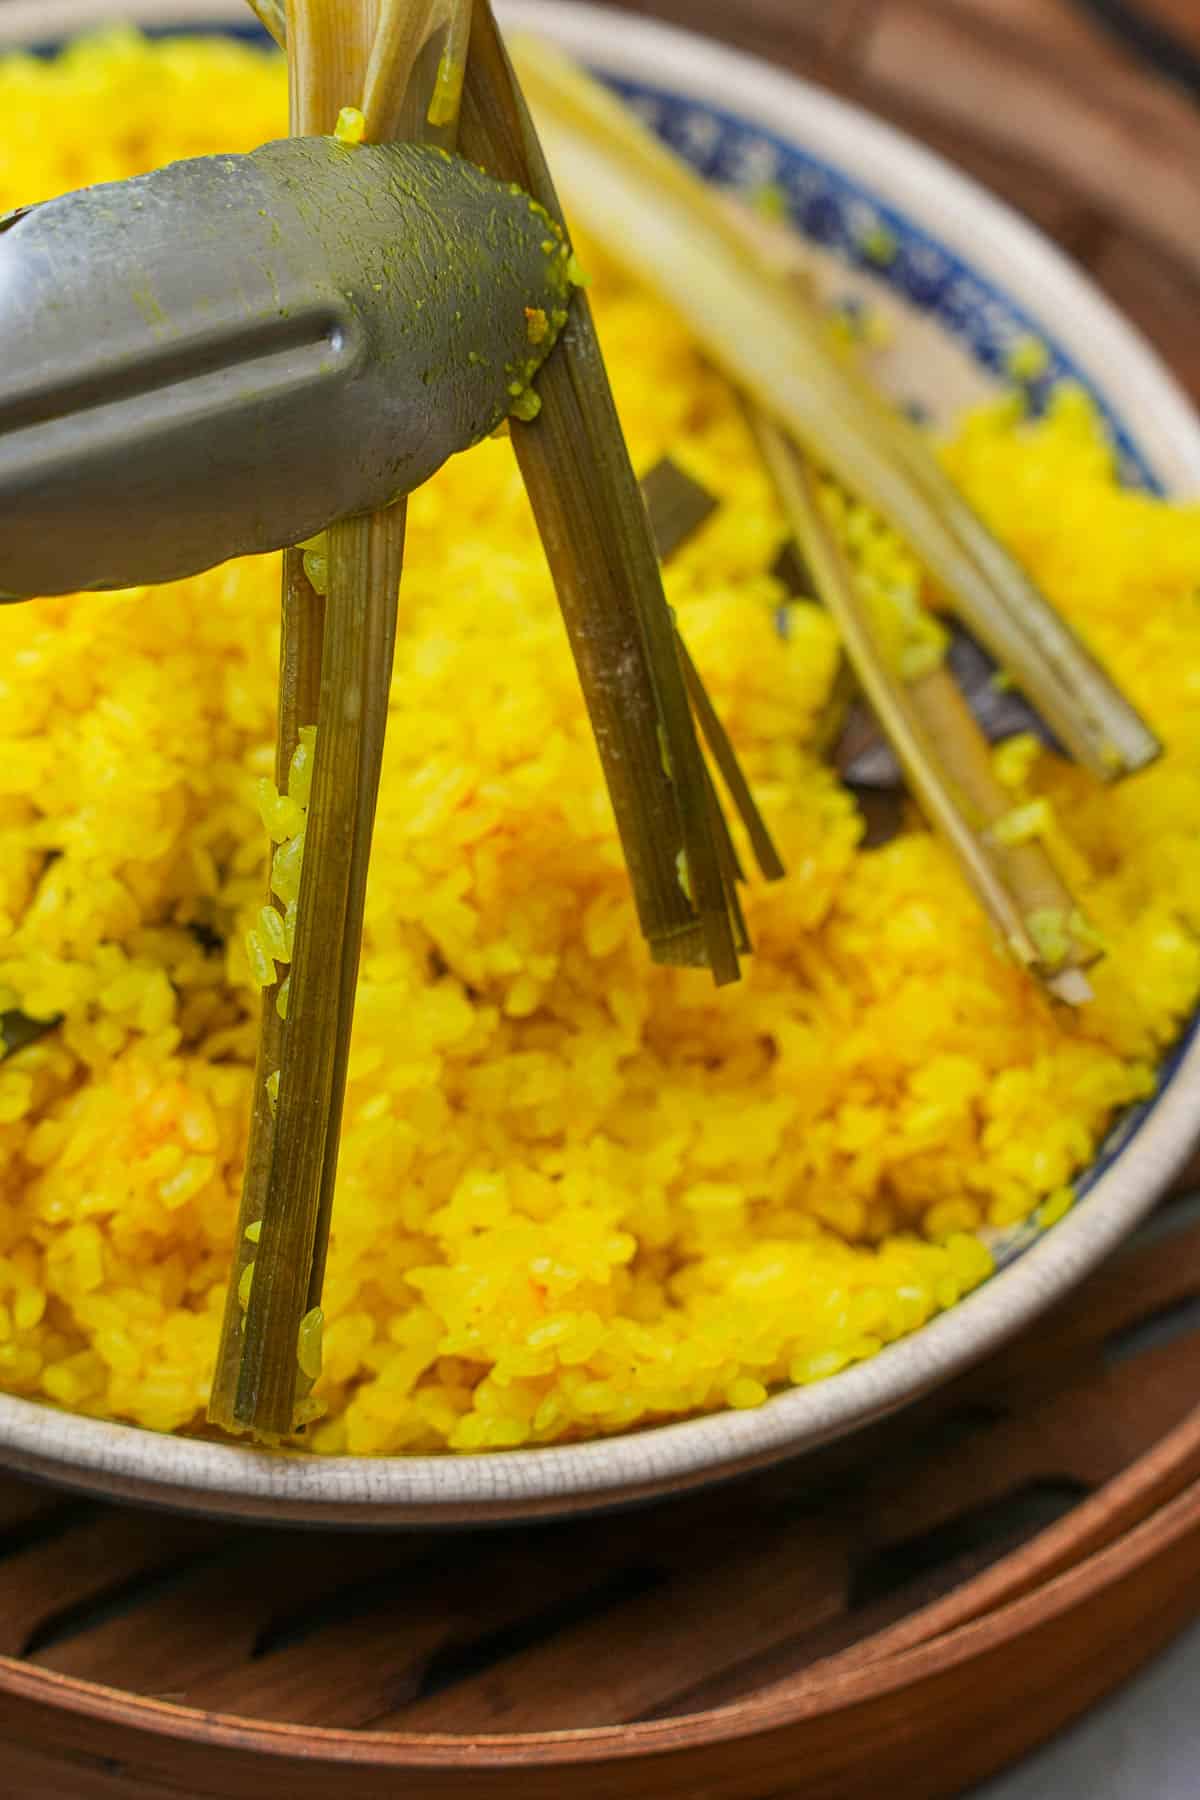 A plate of yellow rice with a pair of tongs removing pandan leaves from it.